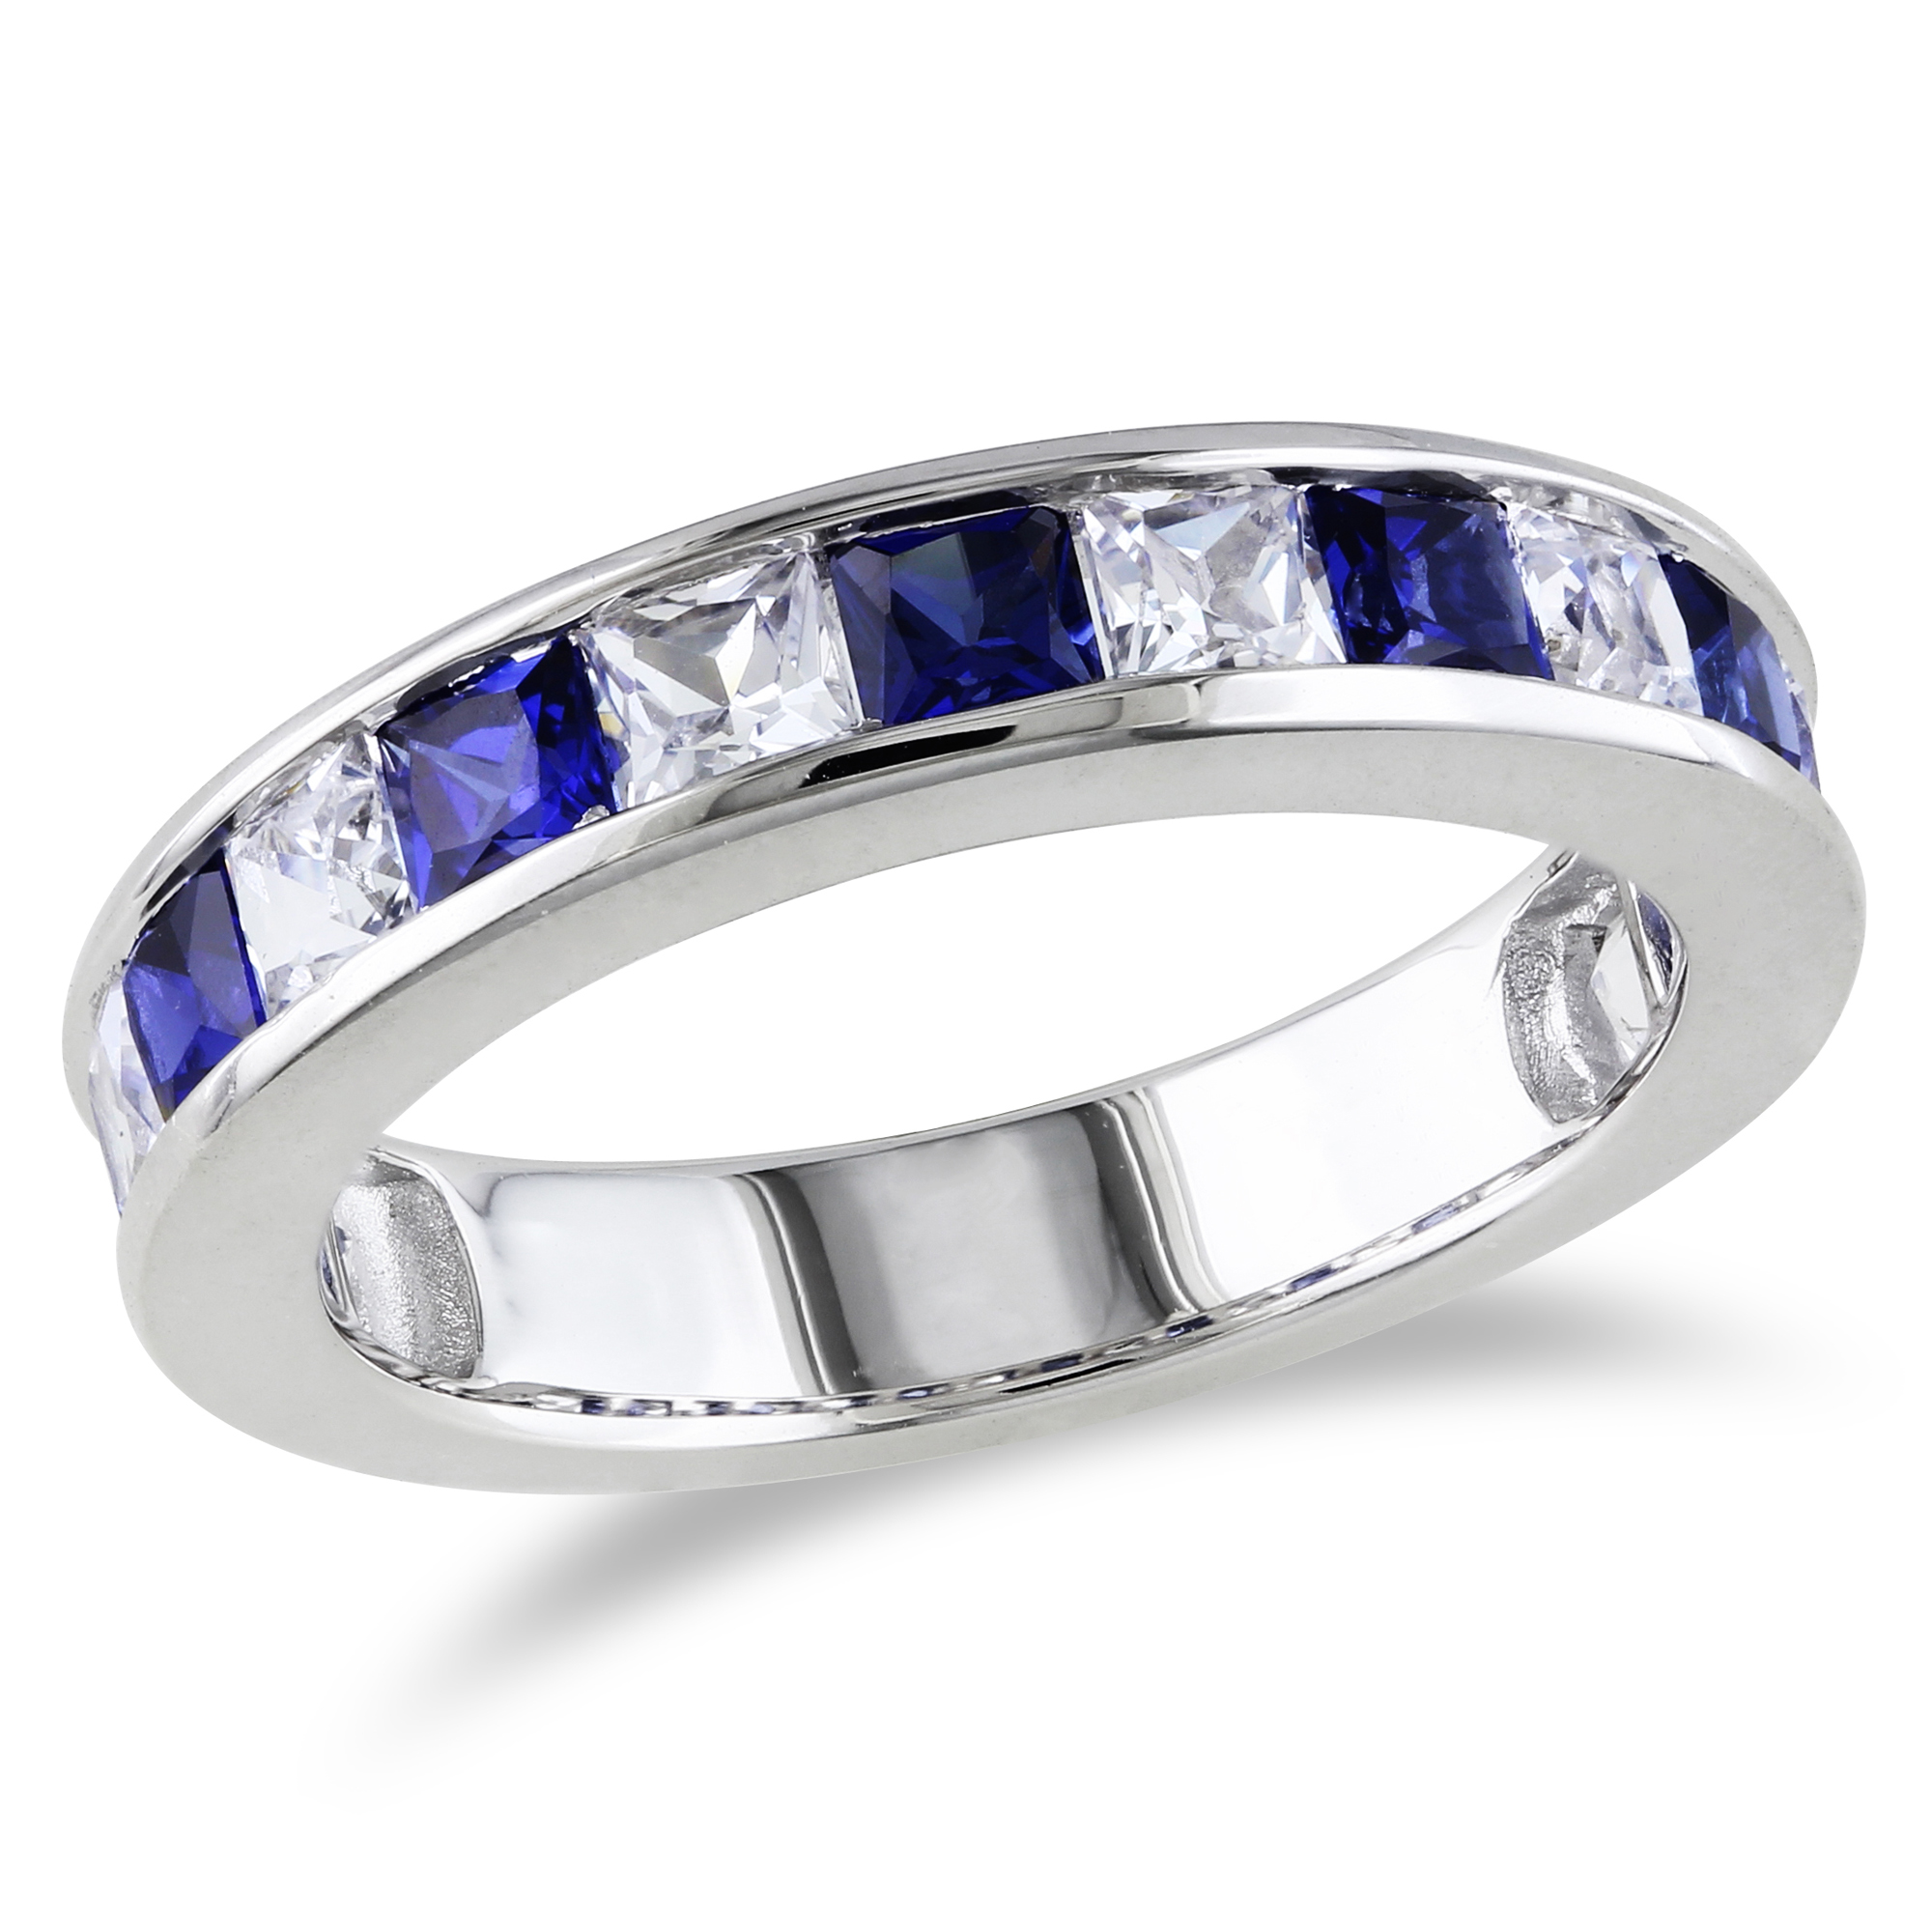 Amour 2 3/8 Carat T.G.W. Multi-Sapphire Fashion Ring in Sterling Silver